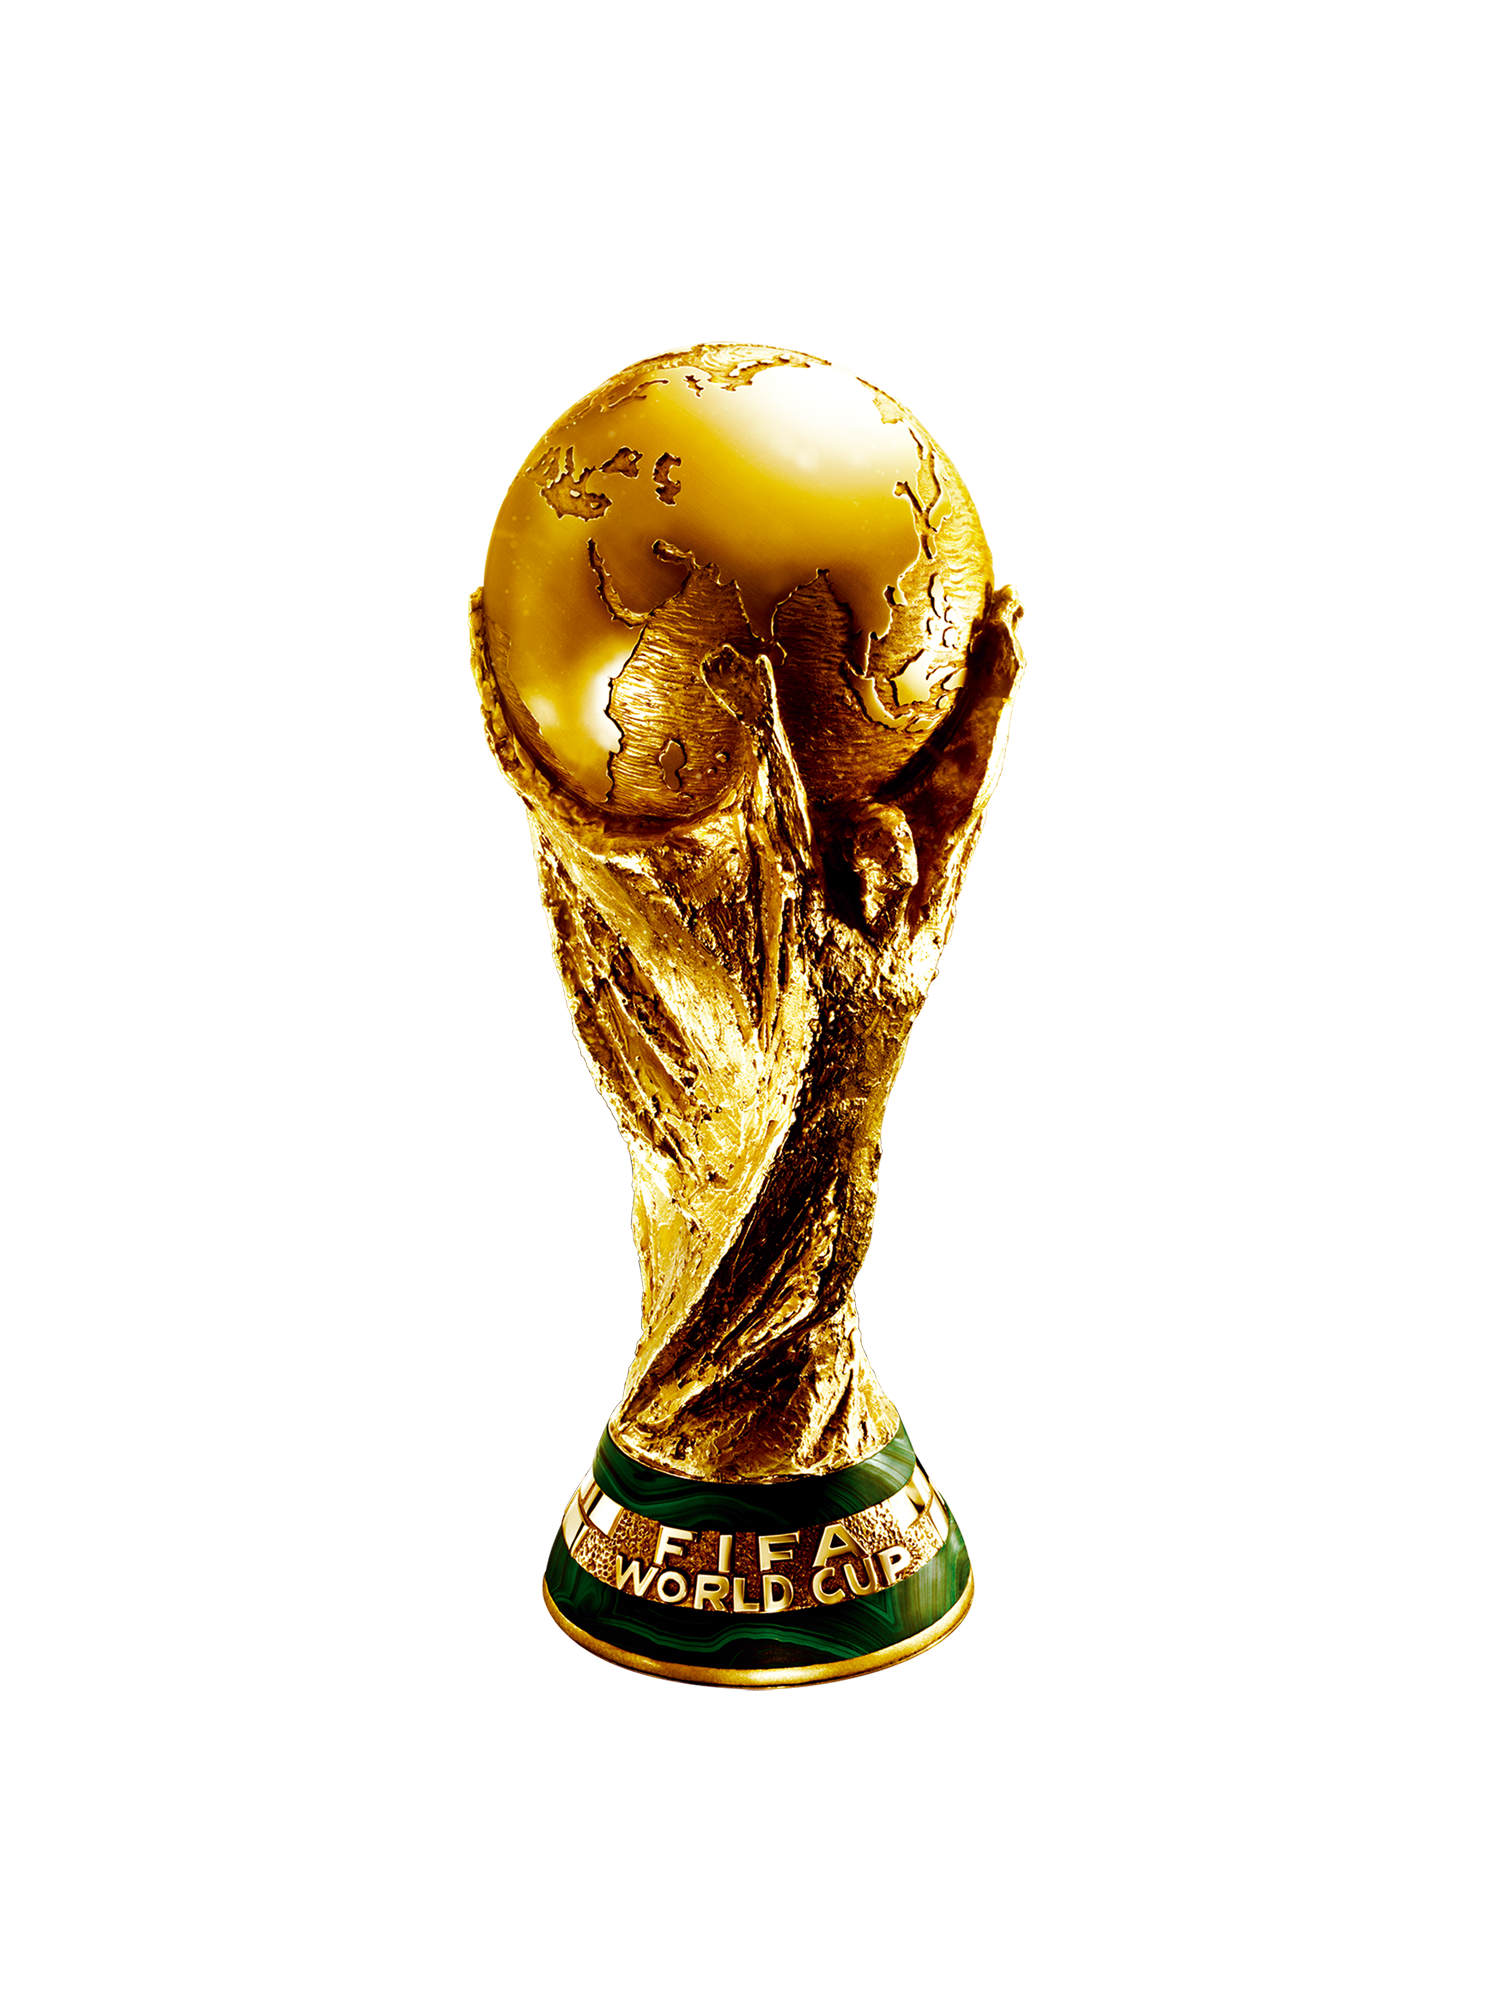 https://static.wikia.nocookie.net/ilih/images/e/e6/World_Cup.png/revision/latest?cb=20181019184716